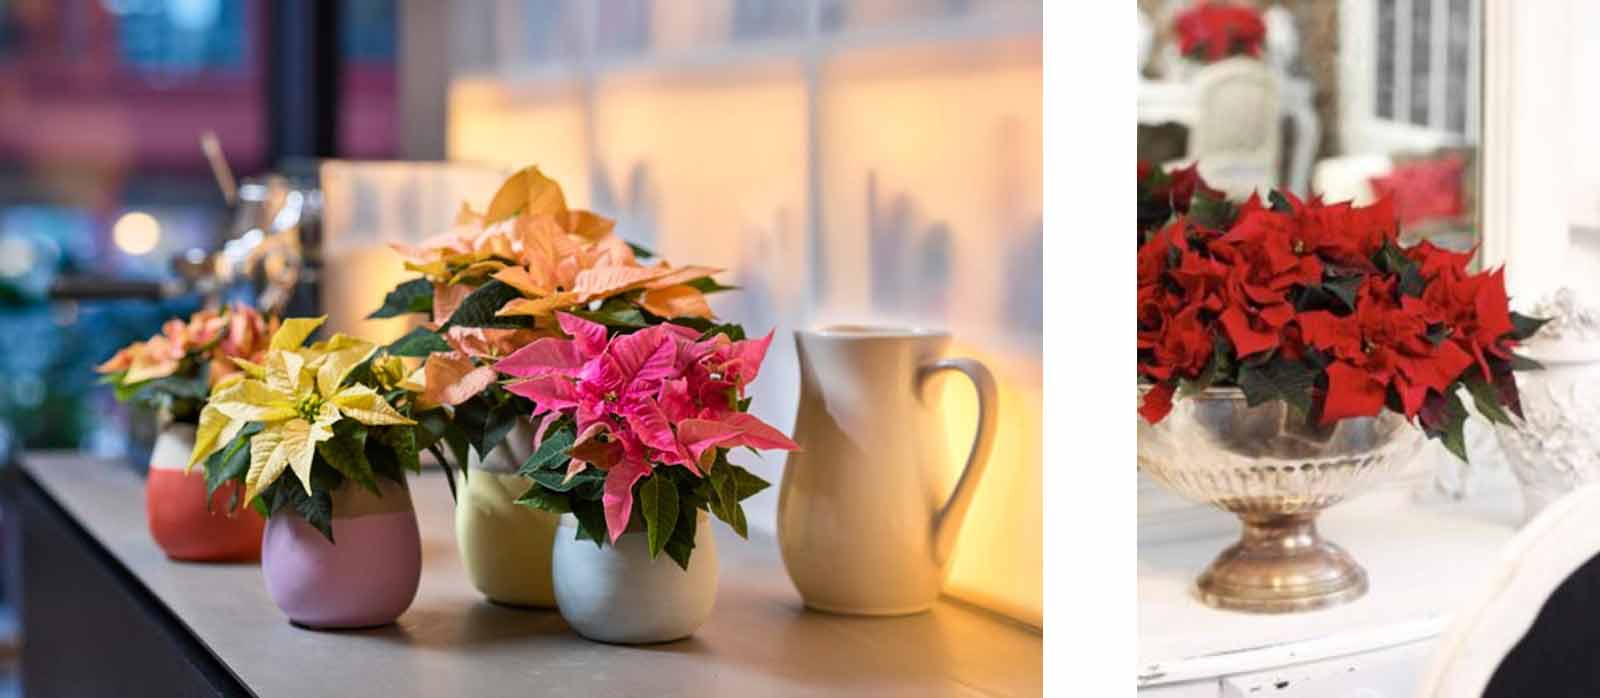 How to Choose and Care for your Poinsettia - Burston Garden Centre